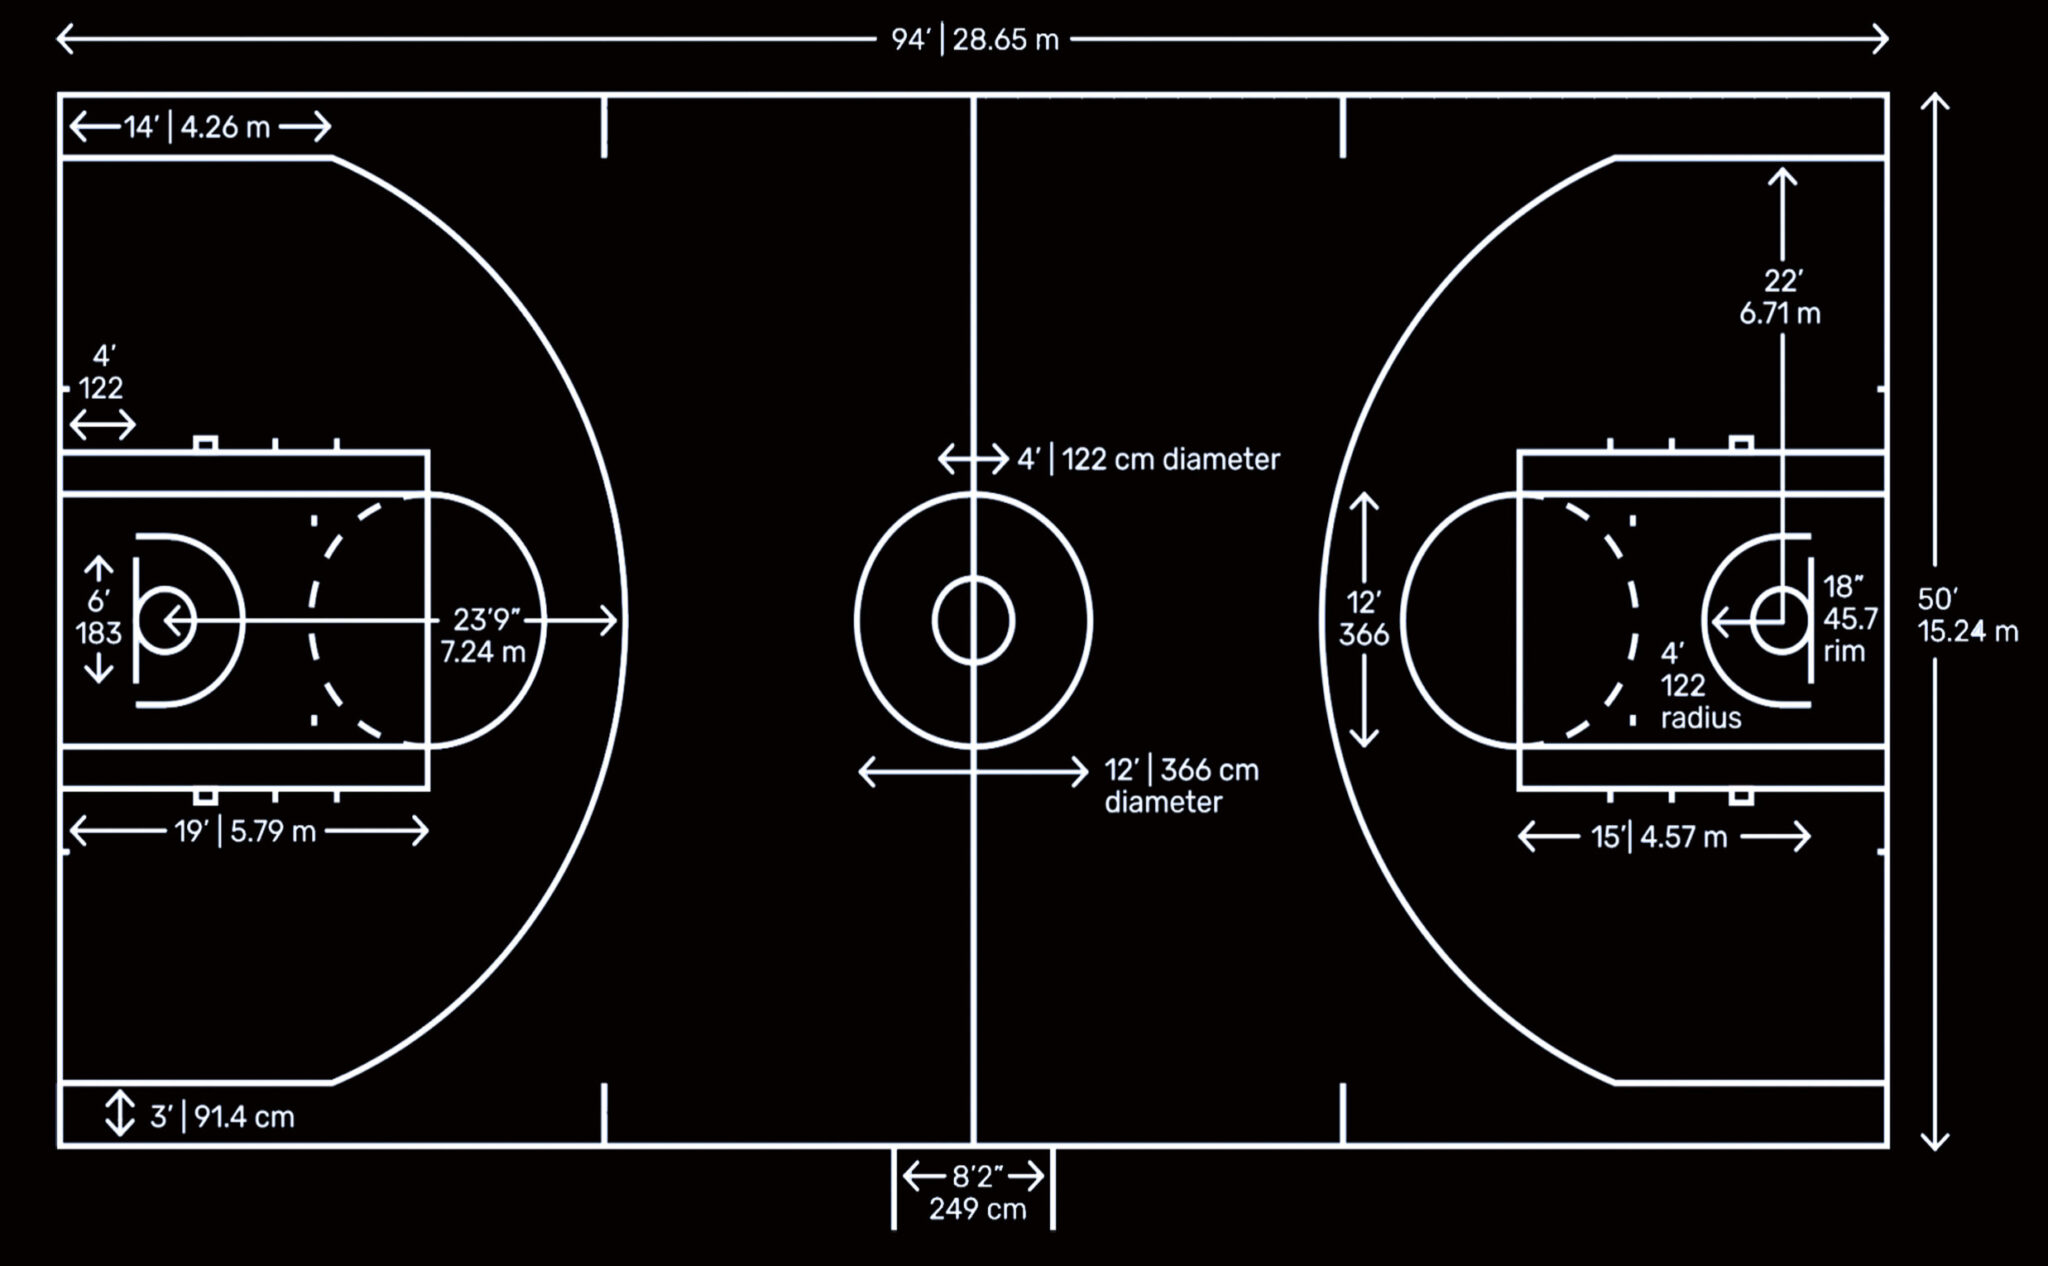 Basketball Court Dimensions Layout for Court Marking / Striping